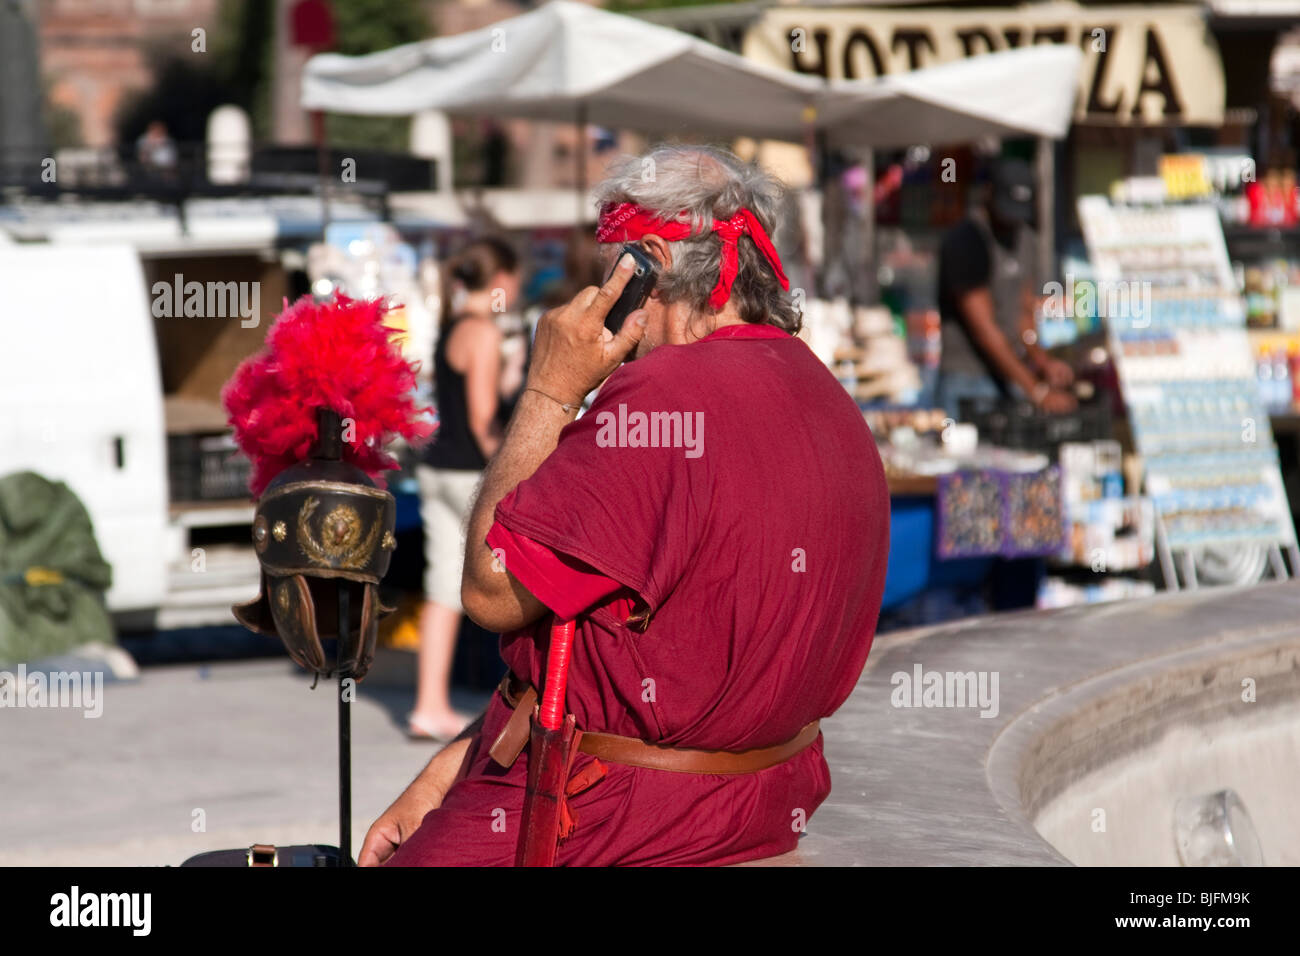 Man dressed as Roman Gladiator in the street of Rome speaking at his mobile phone. Rome, Italy Stock Photo